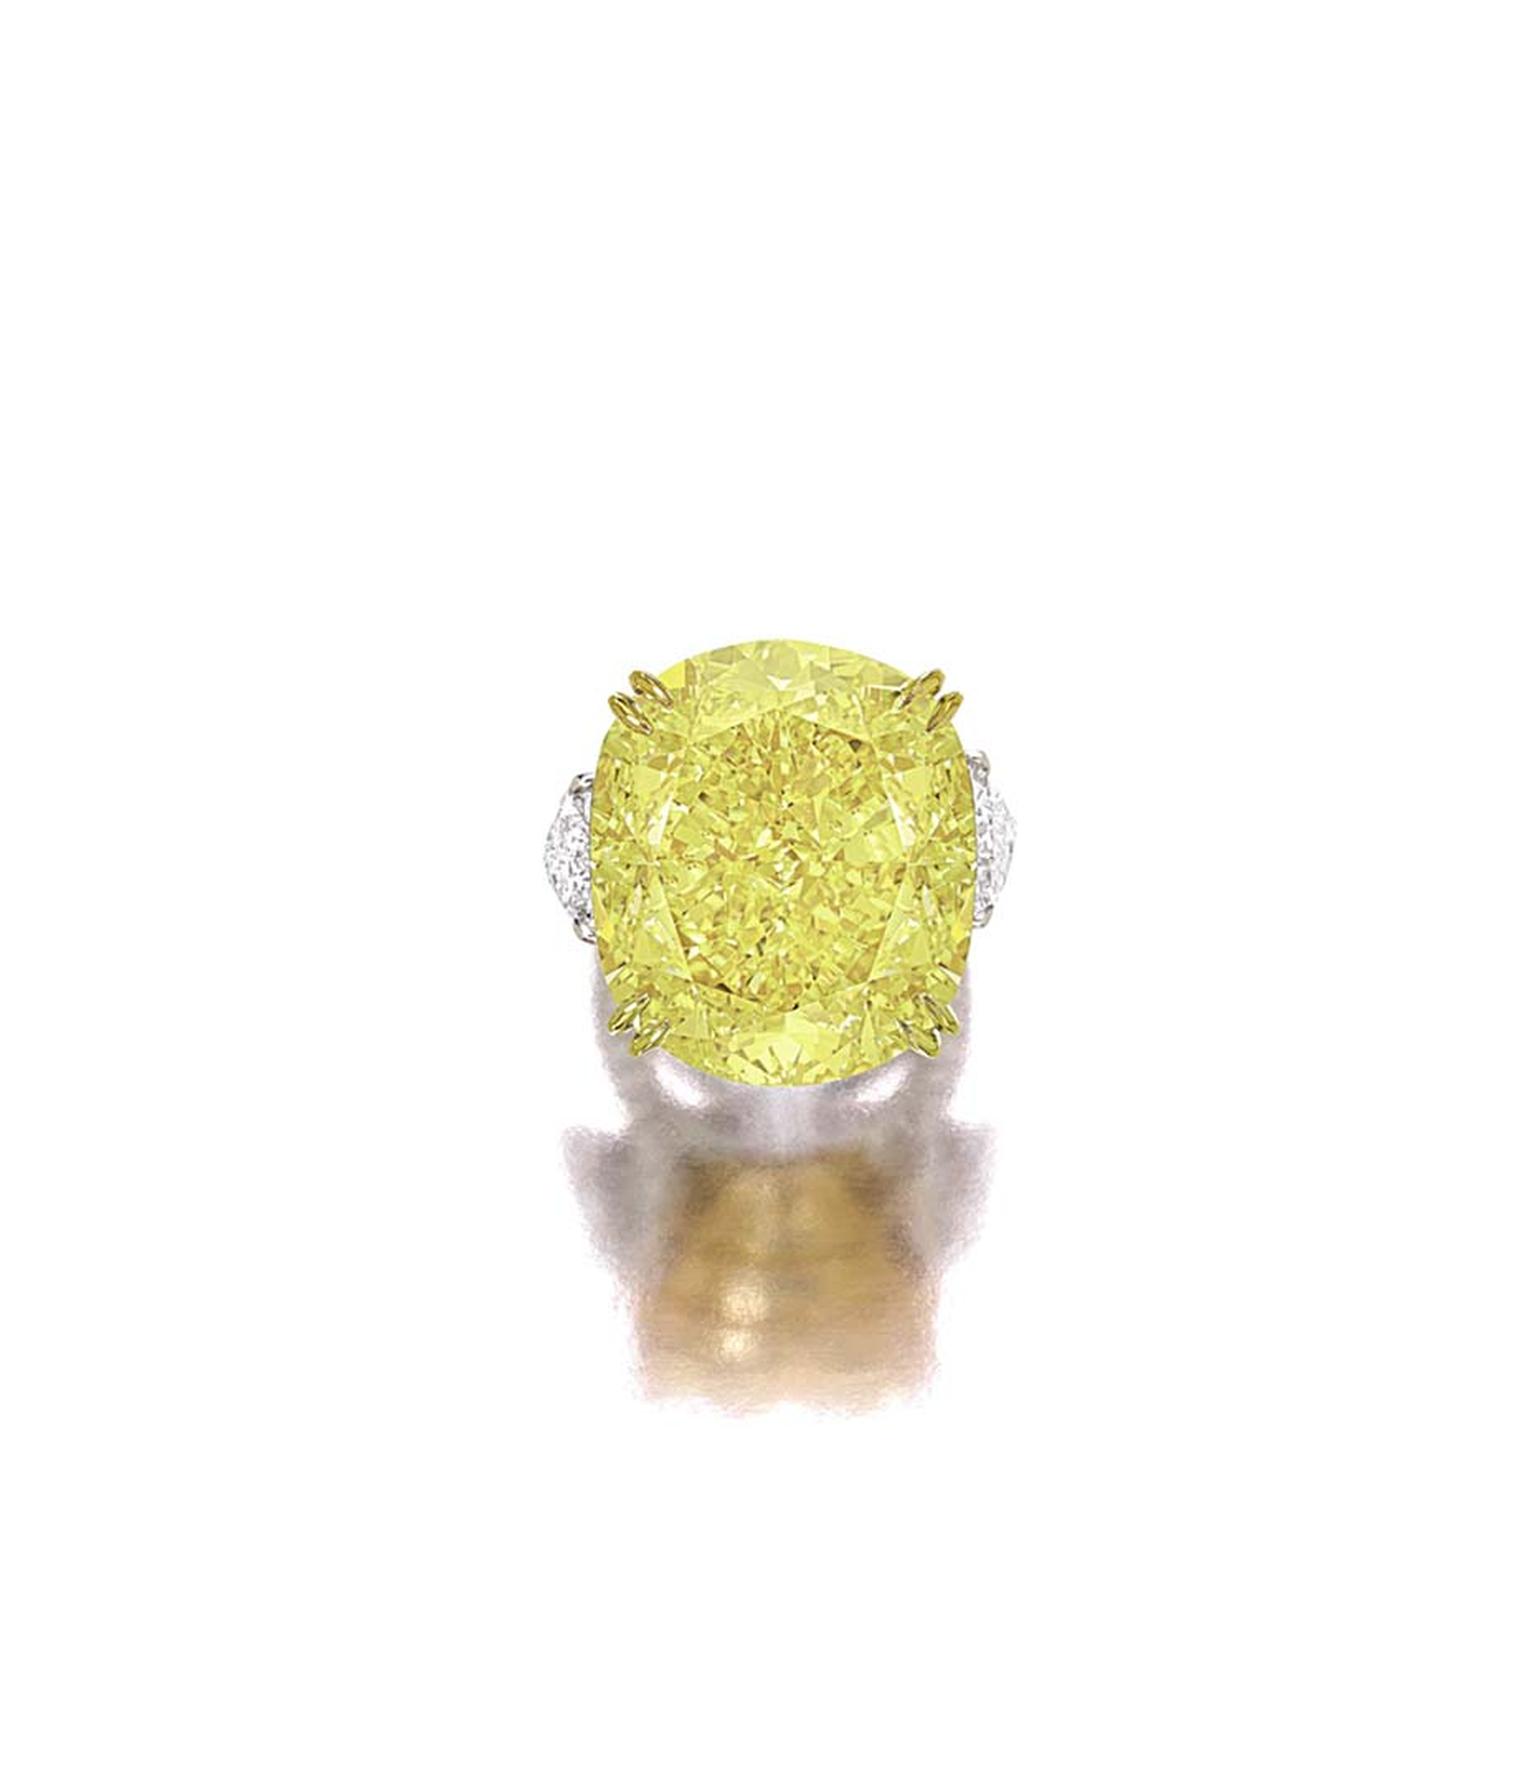 Sotheby’s Hong Kong Magnificent Jewels and Jadeite spring sale includes a 77.77ct VS2 Fancy Vivid Yellow Diamond Ring (lot 1897) with an estimate of US$6.8m-7.5m.